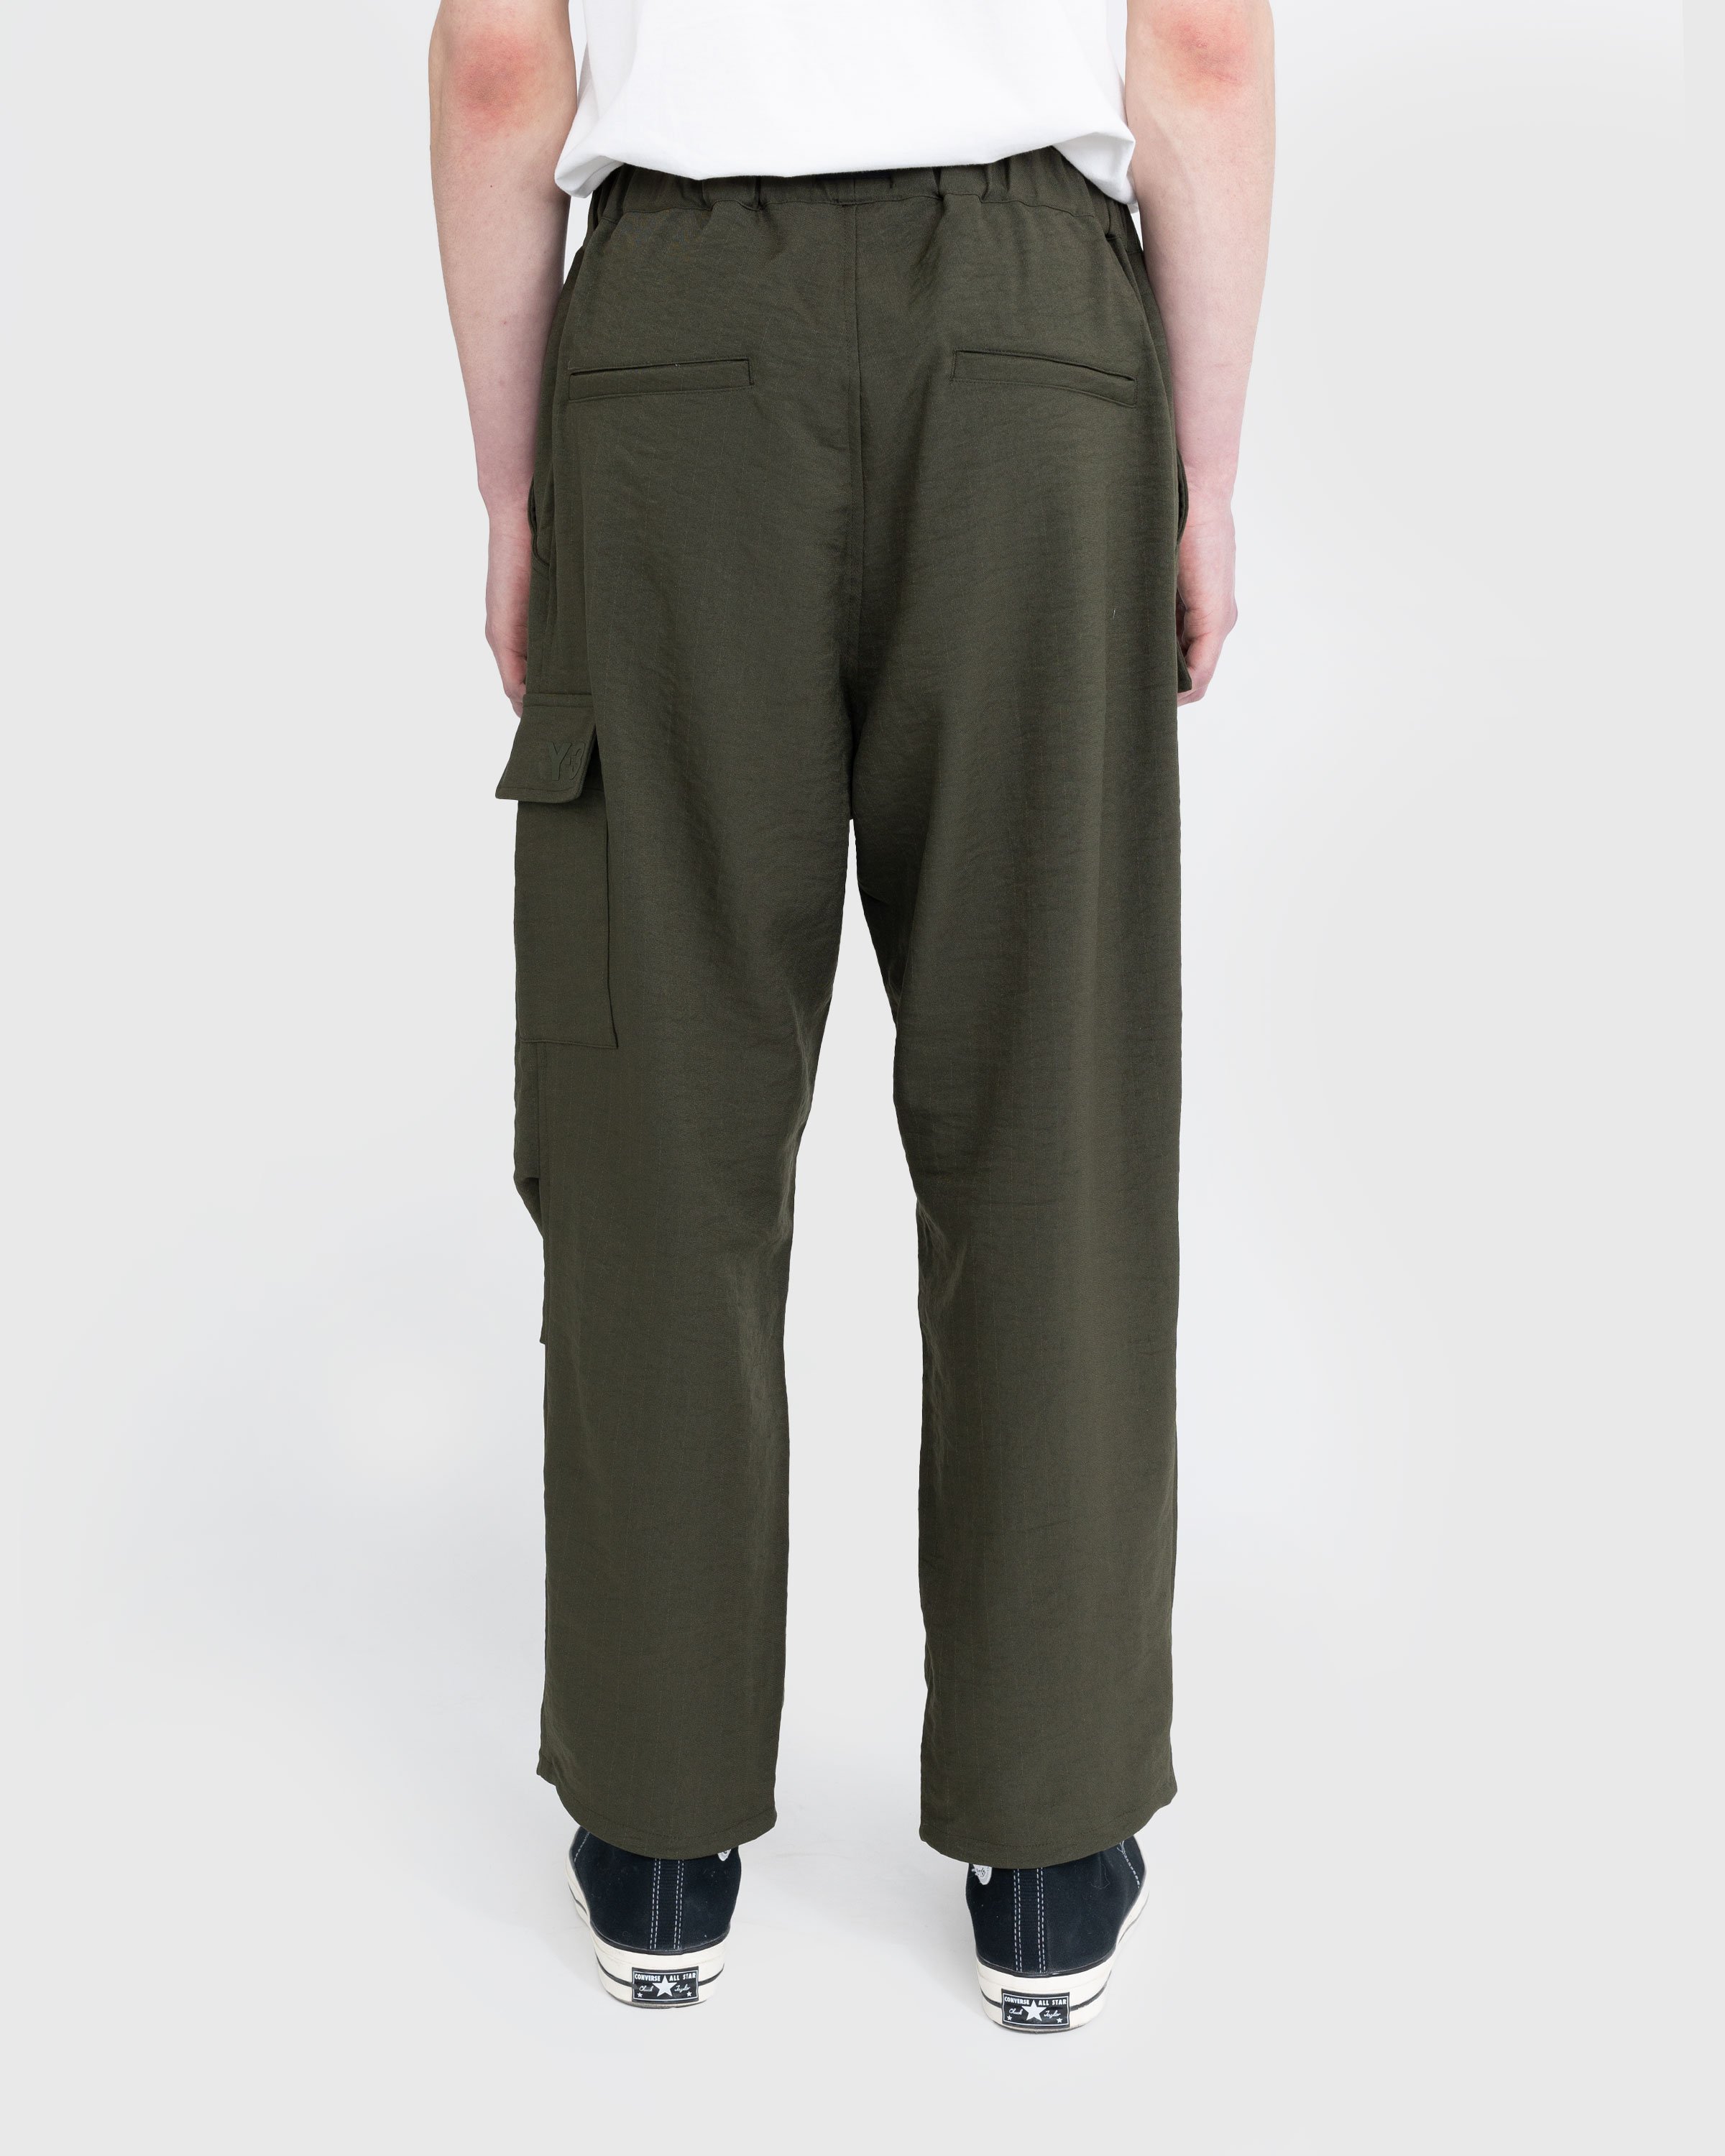 Y-3 - CL SL Cargo Pants - Clothing - Green - Image 3